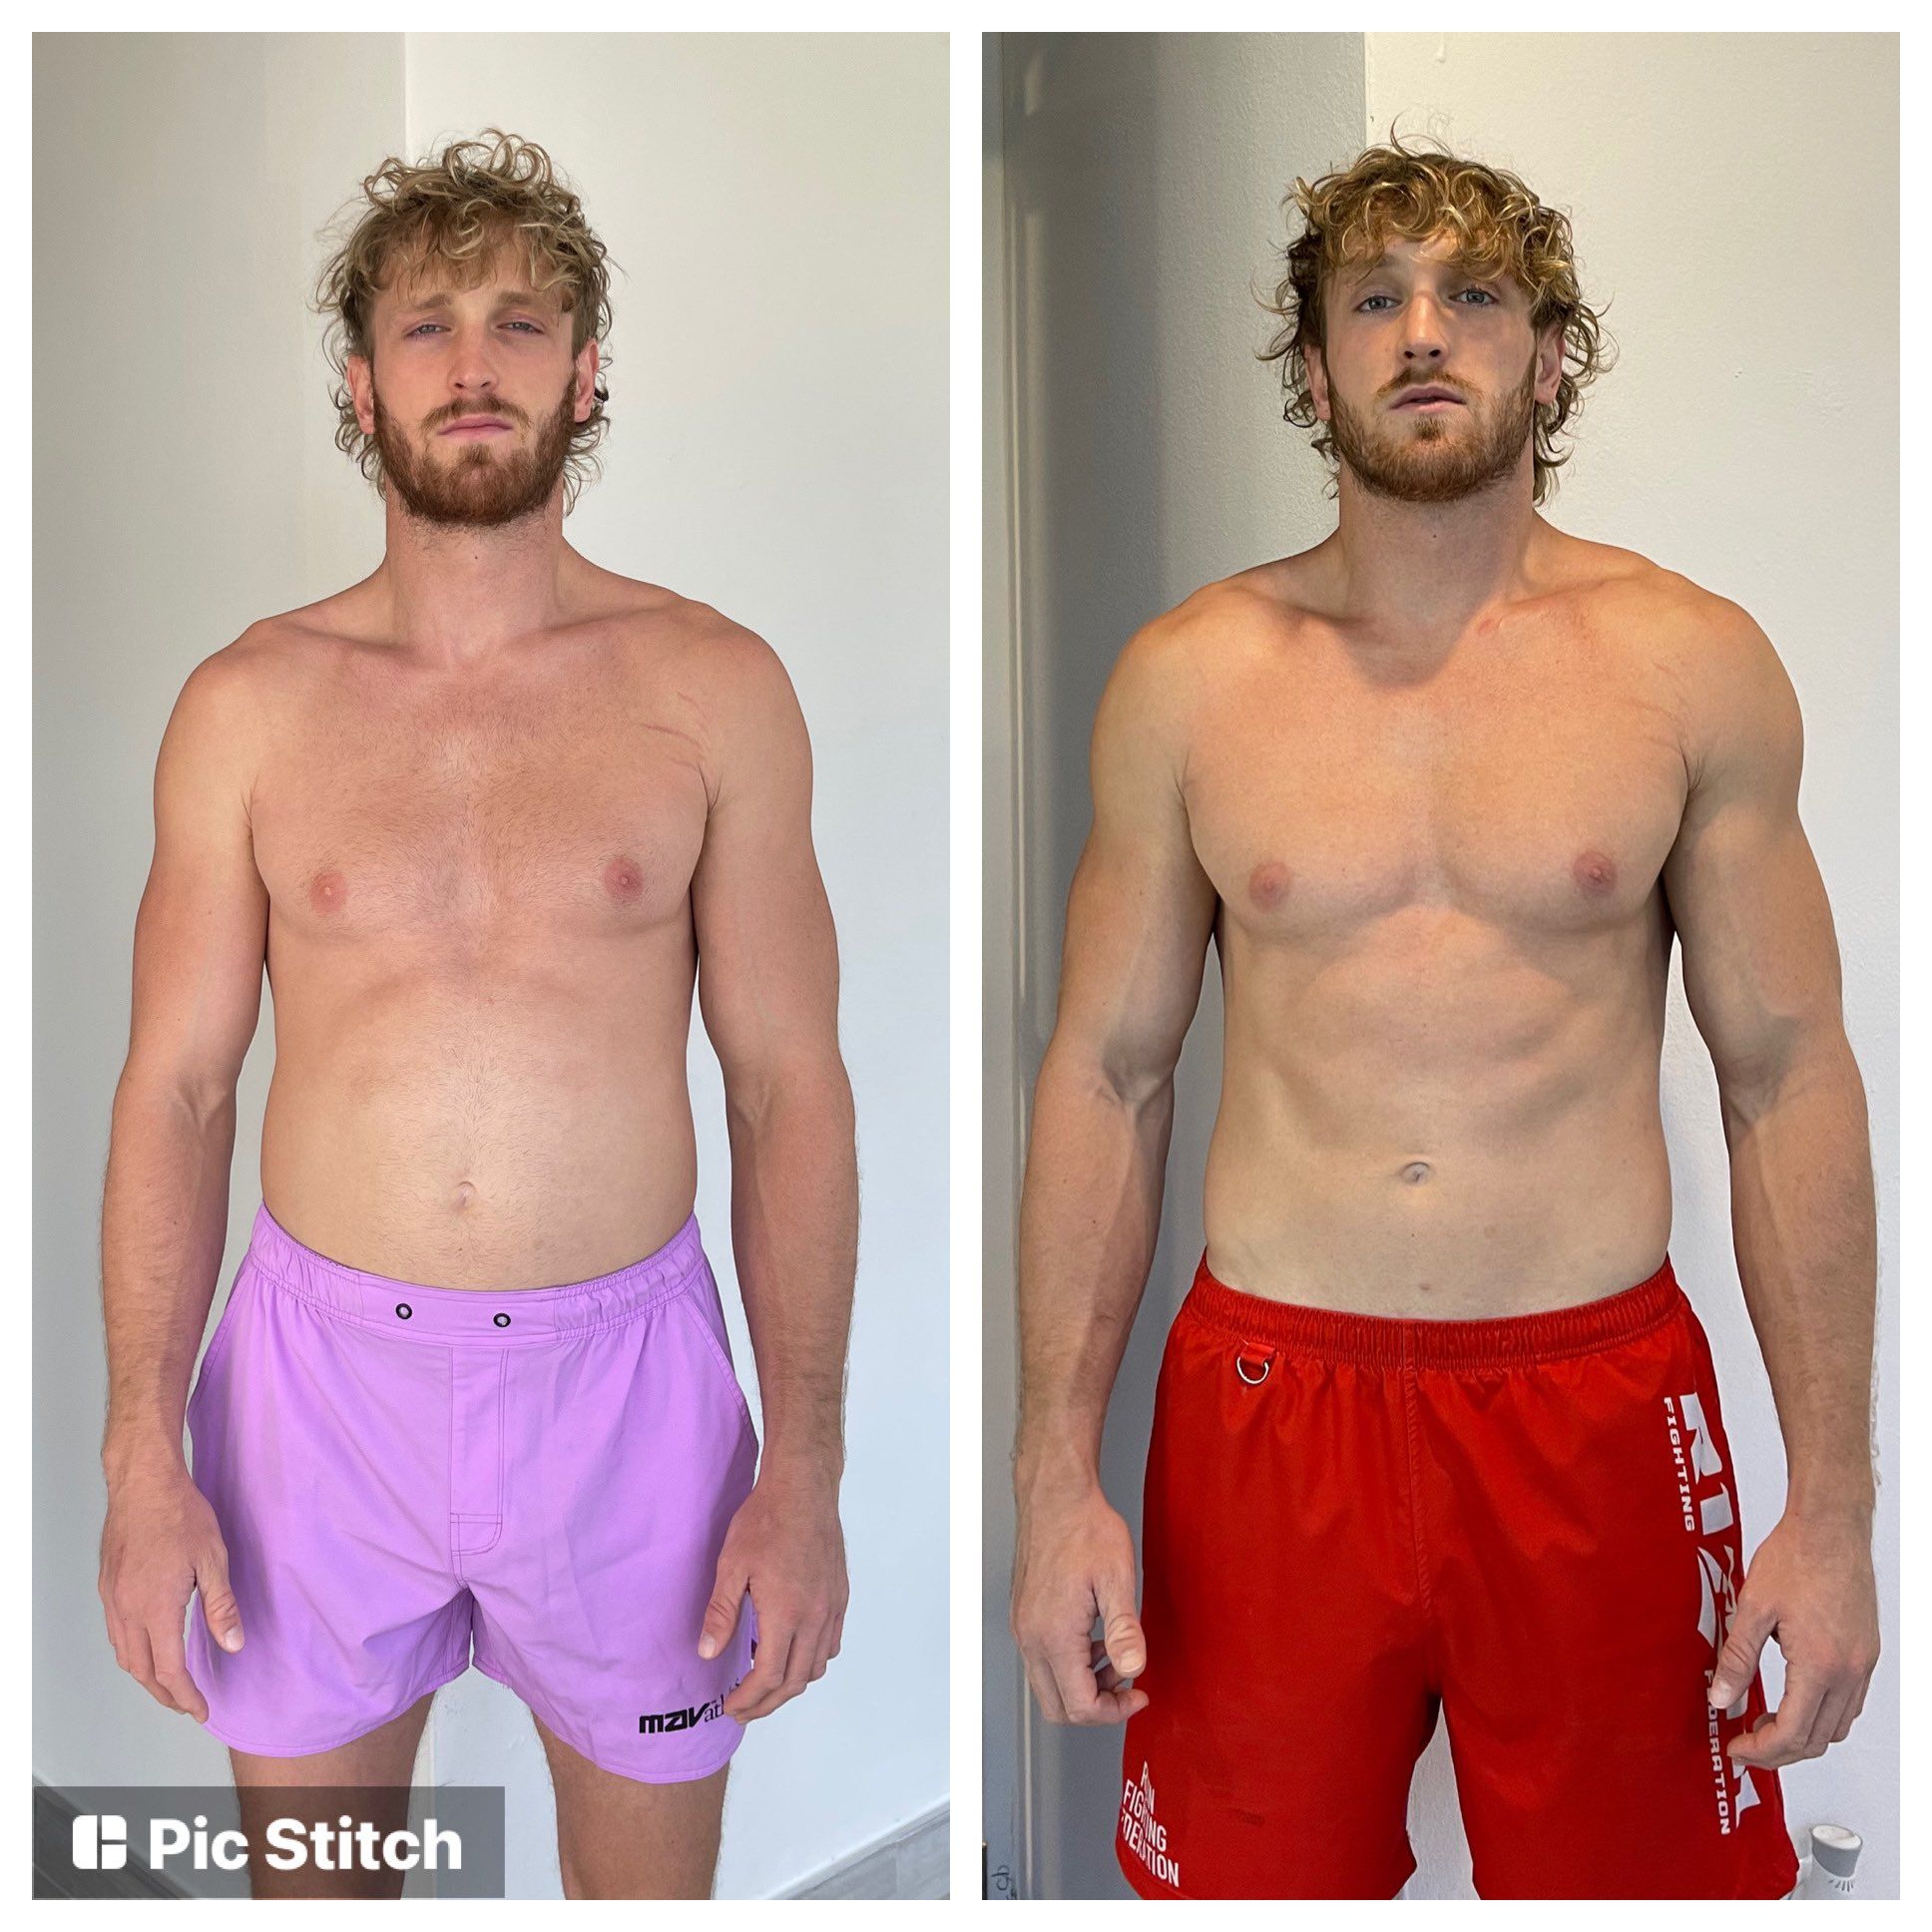 Logan Paul's body transformation before WrestleMania was out of this world